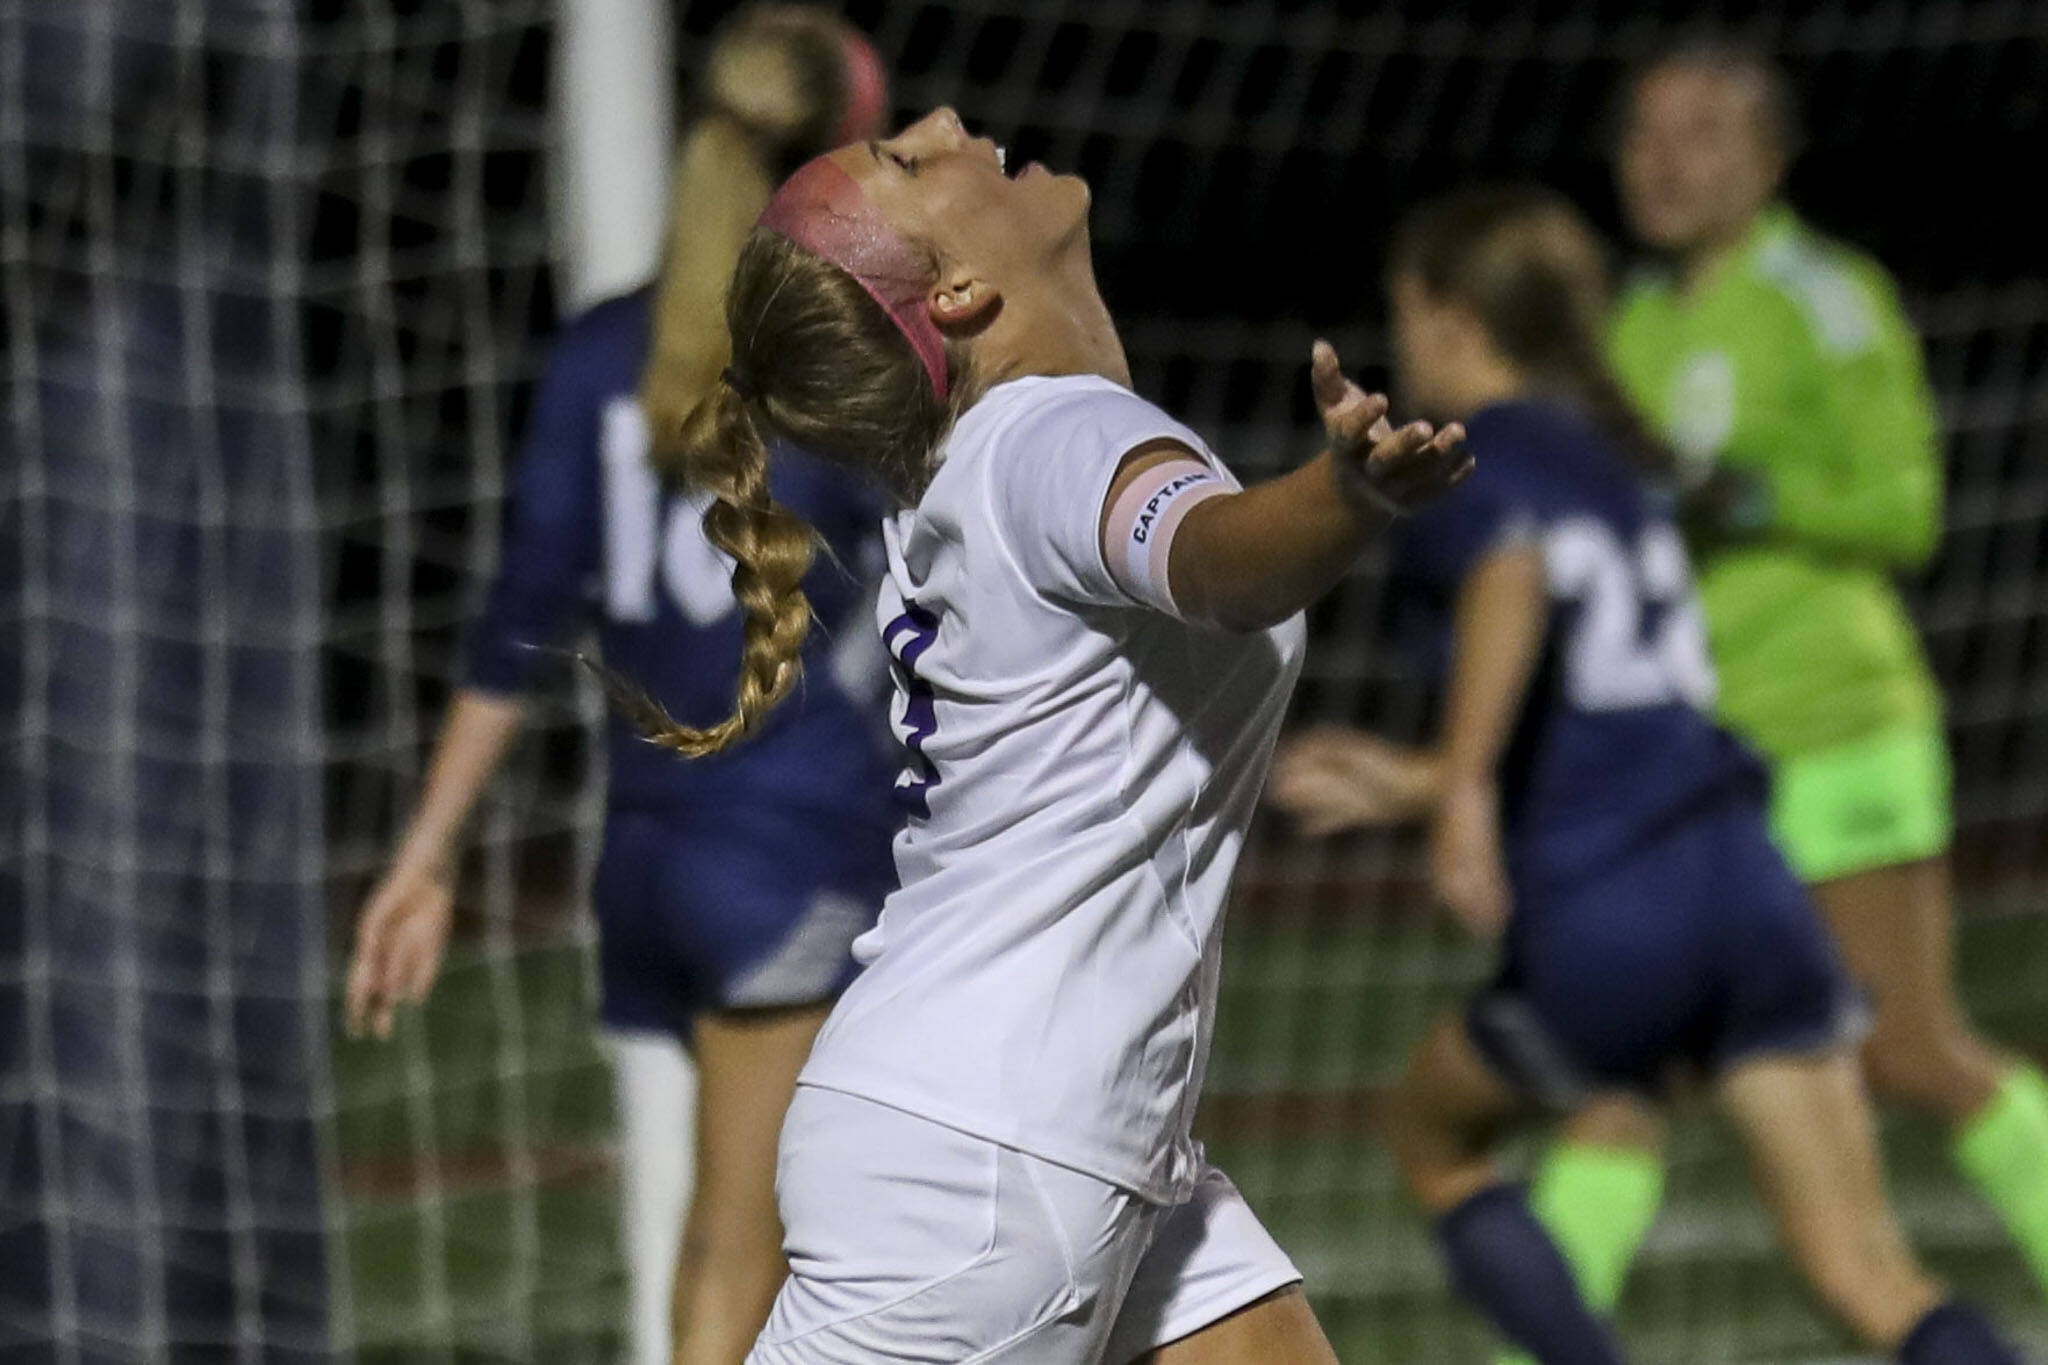 A Lake Stevens player reacts to a goal during a girls soccer game between Glacier Peak and Lake Stevens at Glacier Peak High School in Snohomish, Washington on Thursday, Sept. 21, 2023. Lake Stevens won, 2-1. (Annie Barker / The Herald)